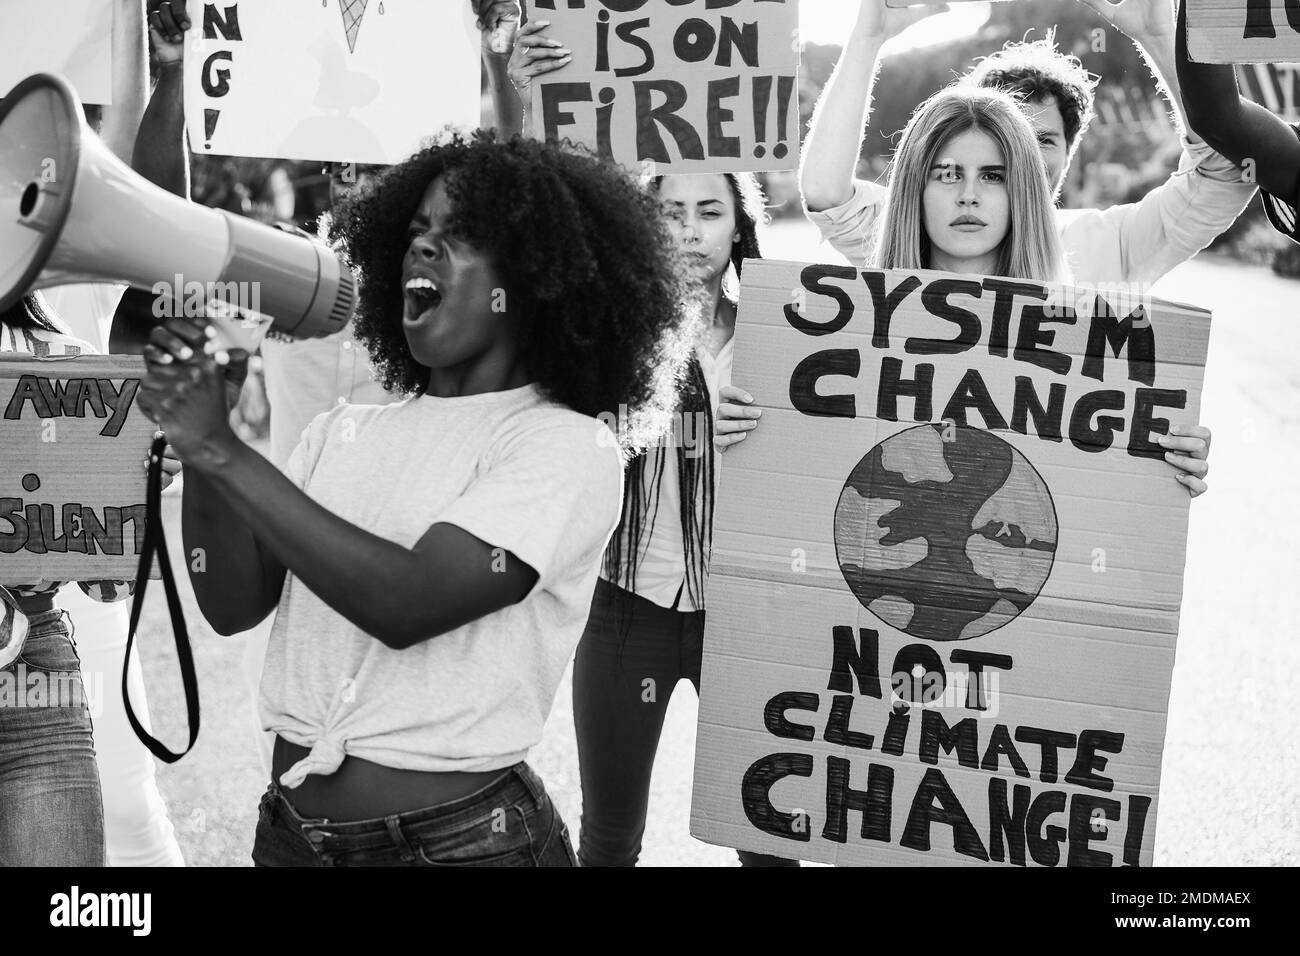 Young group of demonstrators on road from different culture and race protest for climate change - Focus on right sign - Black and white editing Stock Photo